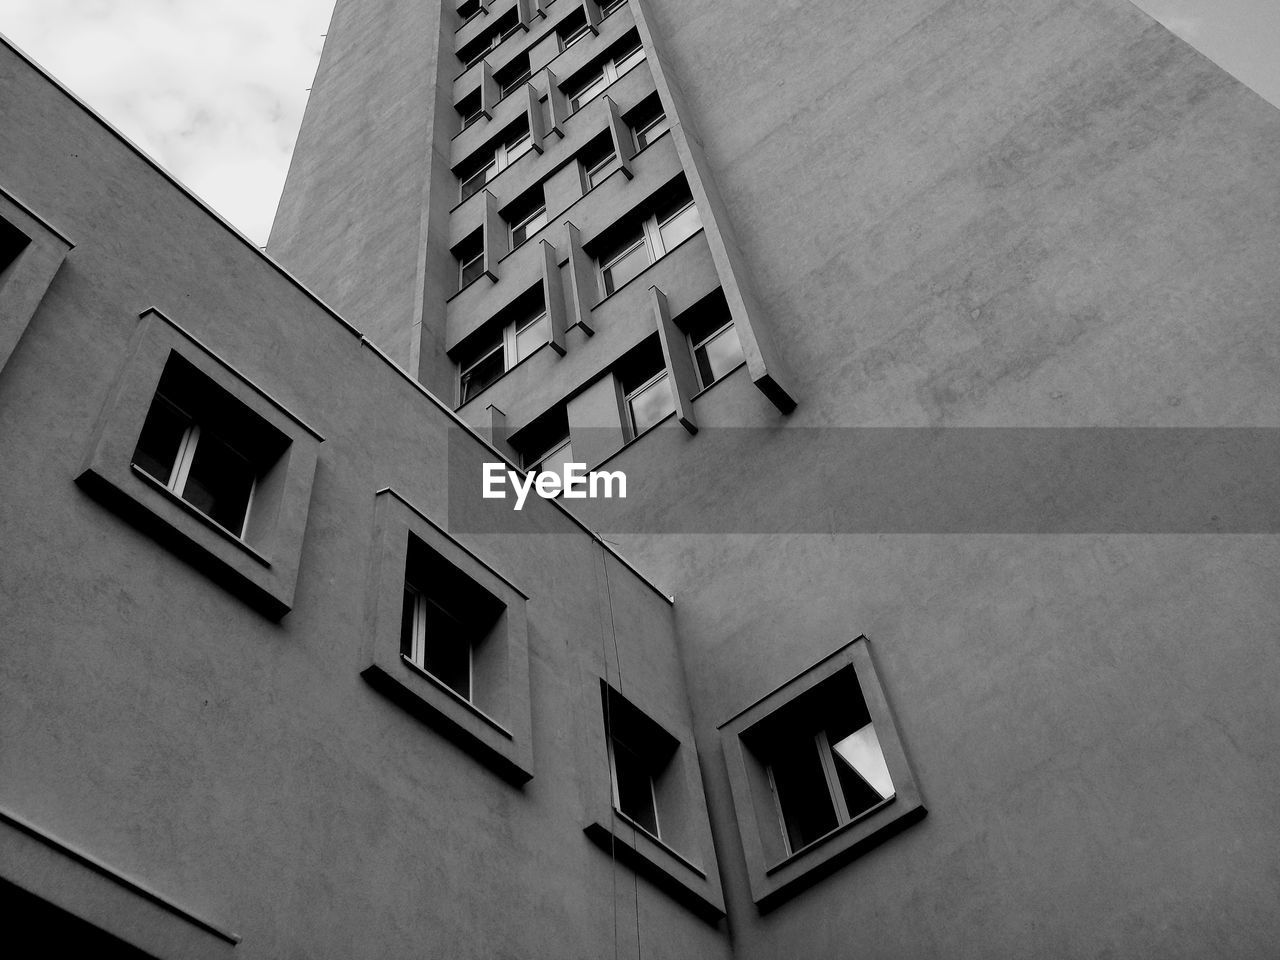 architecture, building exterior, white, built structure, black, black and white, monochrome, building, monochrome photography, window, low angle view, city, no people, house, residential district, sky, line, outdoors, apartment, facade, day